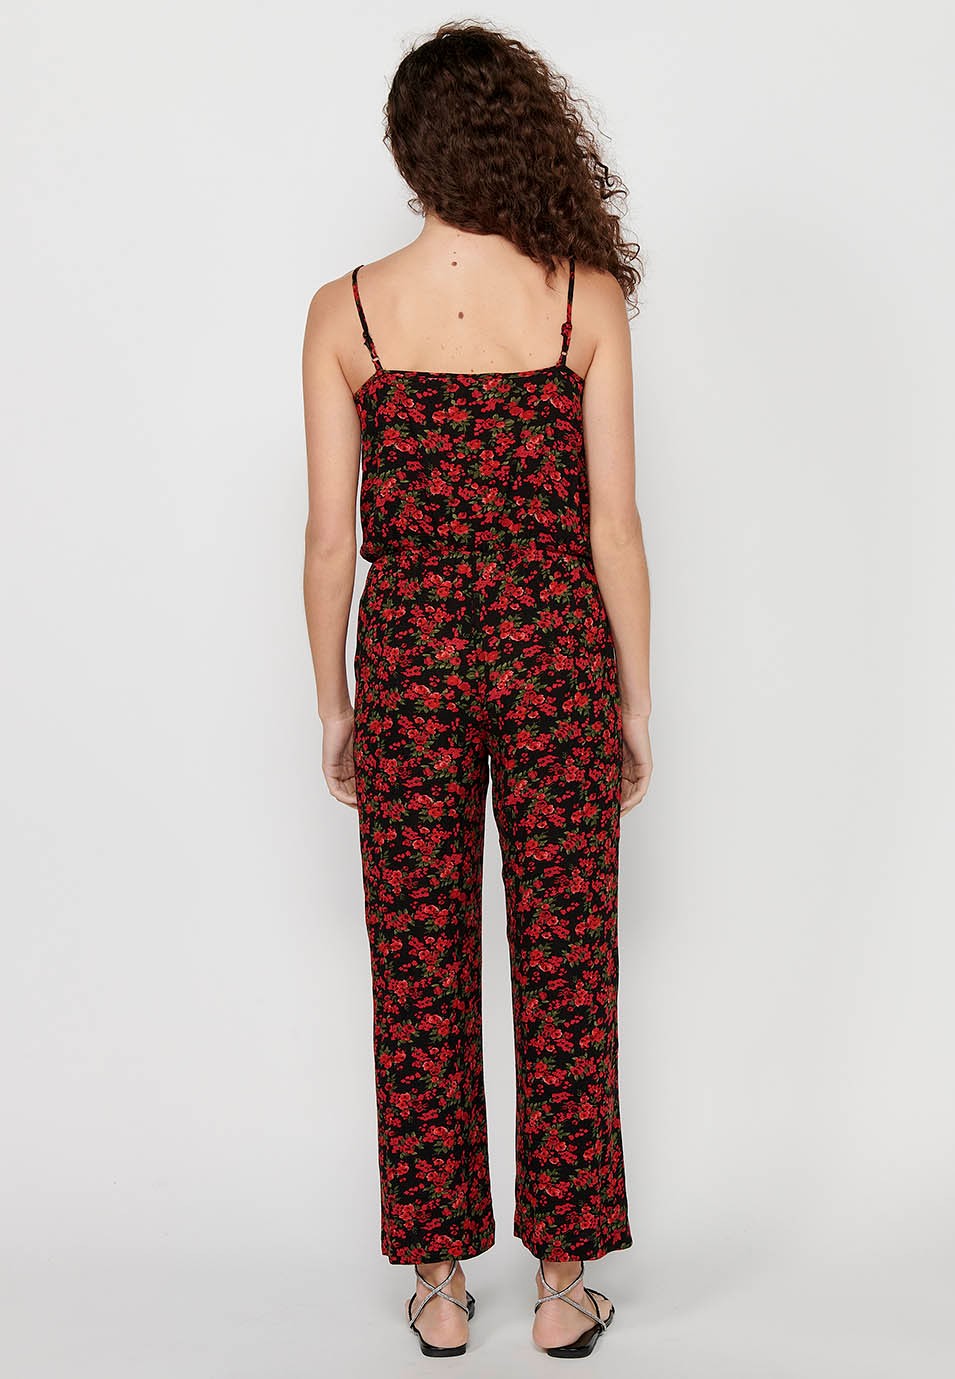 Long dress-trousers with adjustable straps with rubberized waist and red floral print for Women 7